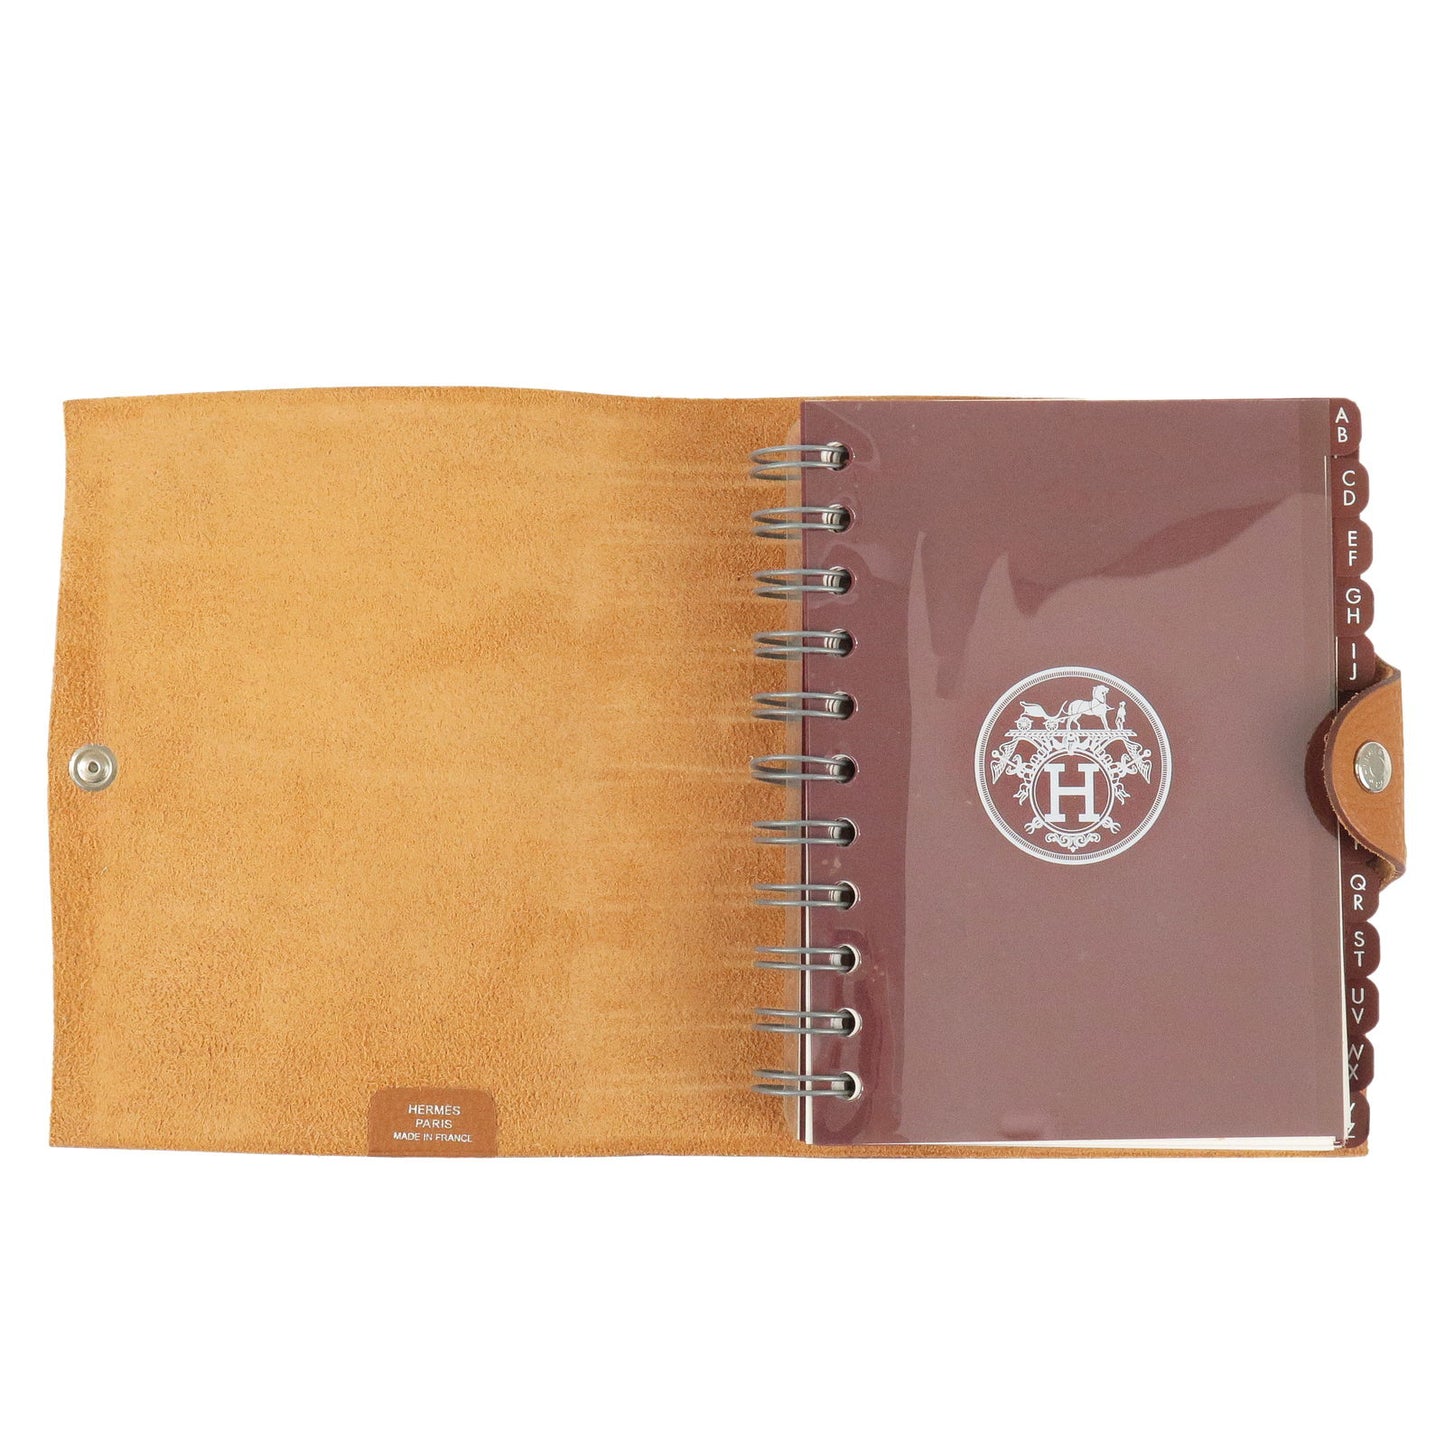 HERMES Taurillon Clemence Ulysse PM Planner Cover Brown J Stamp